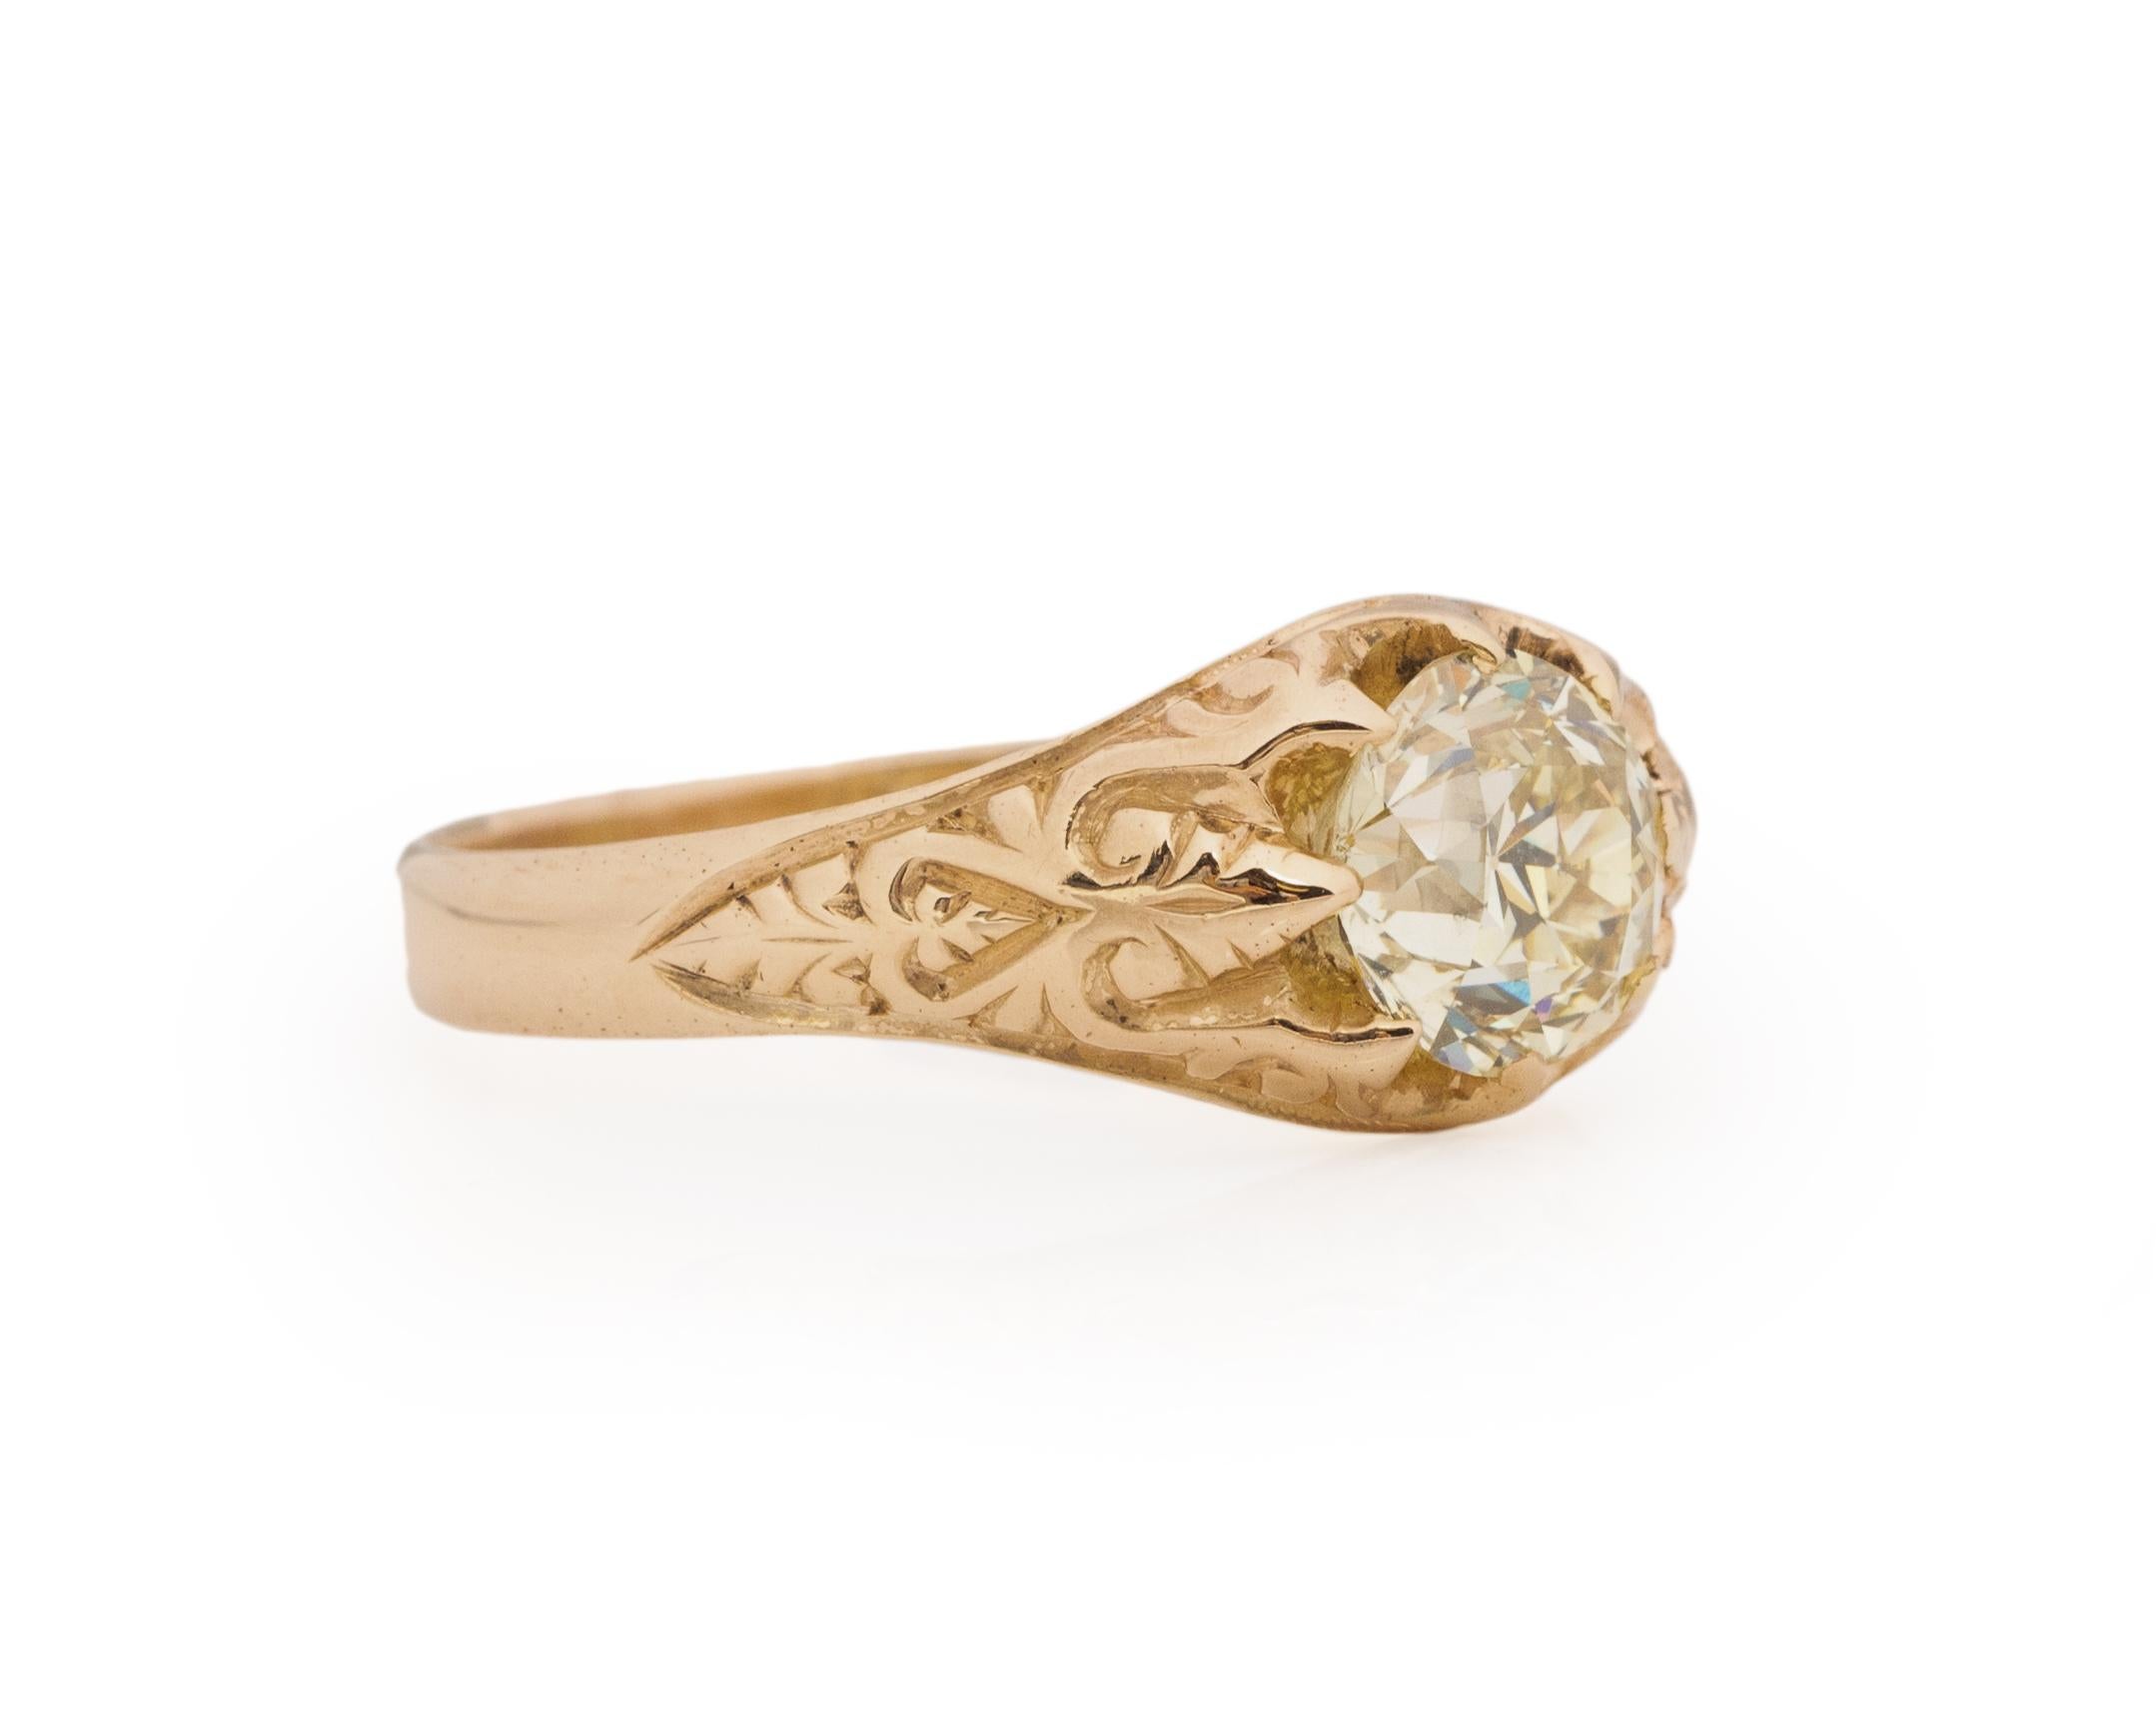 his stunning piece is crafted in 14K yellow gold, along the shanks leading up to the center is come effortlessly carved filigree details giving dimension to the overall piece. In the center we have a GIA graded Circular Brilliant 1.94Ct diamond,